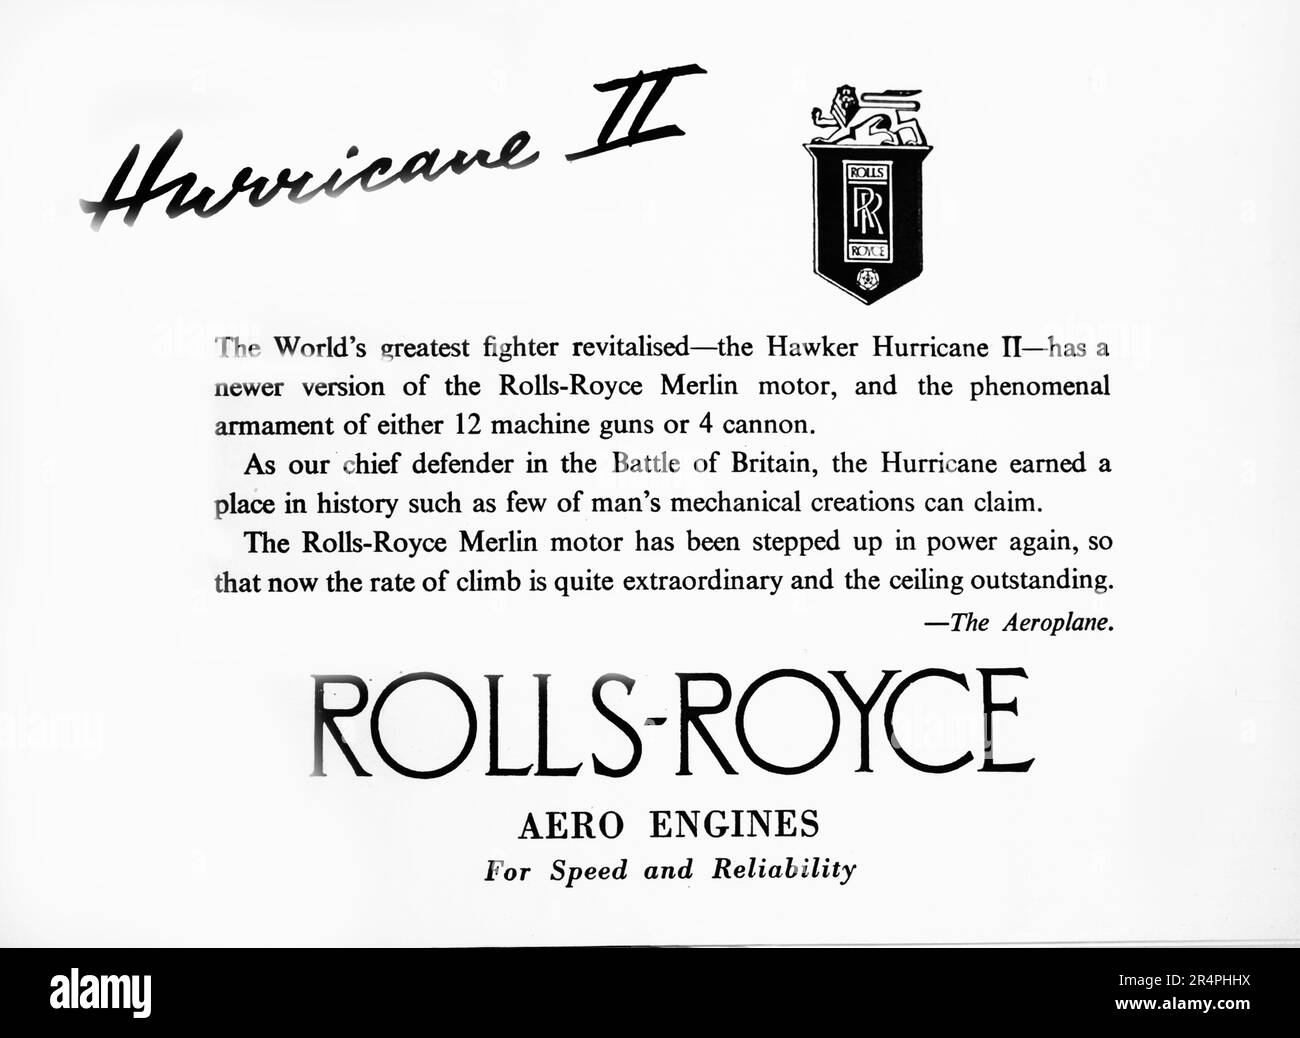 An advertisement in !942 for Rolls Royce engines. The advert references the Hawker Hurricane 11 which had the Rolls Royce Merlin engine fitted. The Hurricane is described as the chief defender in the Battle of Britain in World War 2. Stock Photo